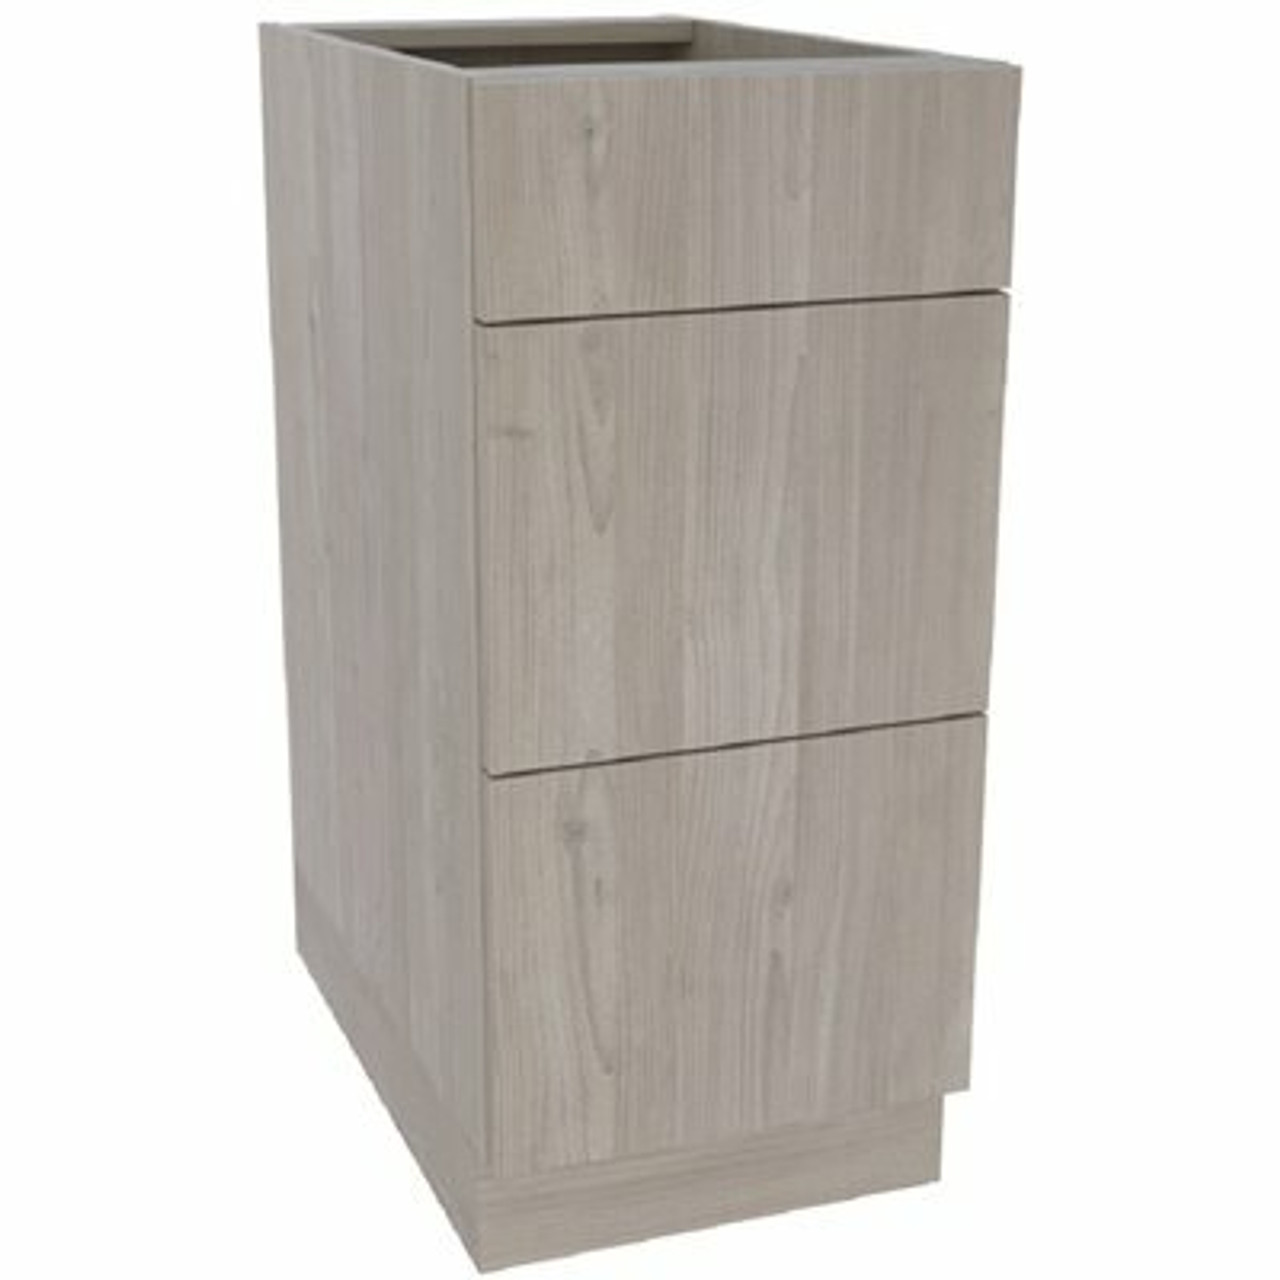 Cambridge Ready To Assemble Threespine 15 In. X 34.5 In. X 24 In. Stock Stock Drawer Base Cabinet In Grey Nordic